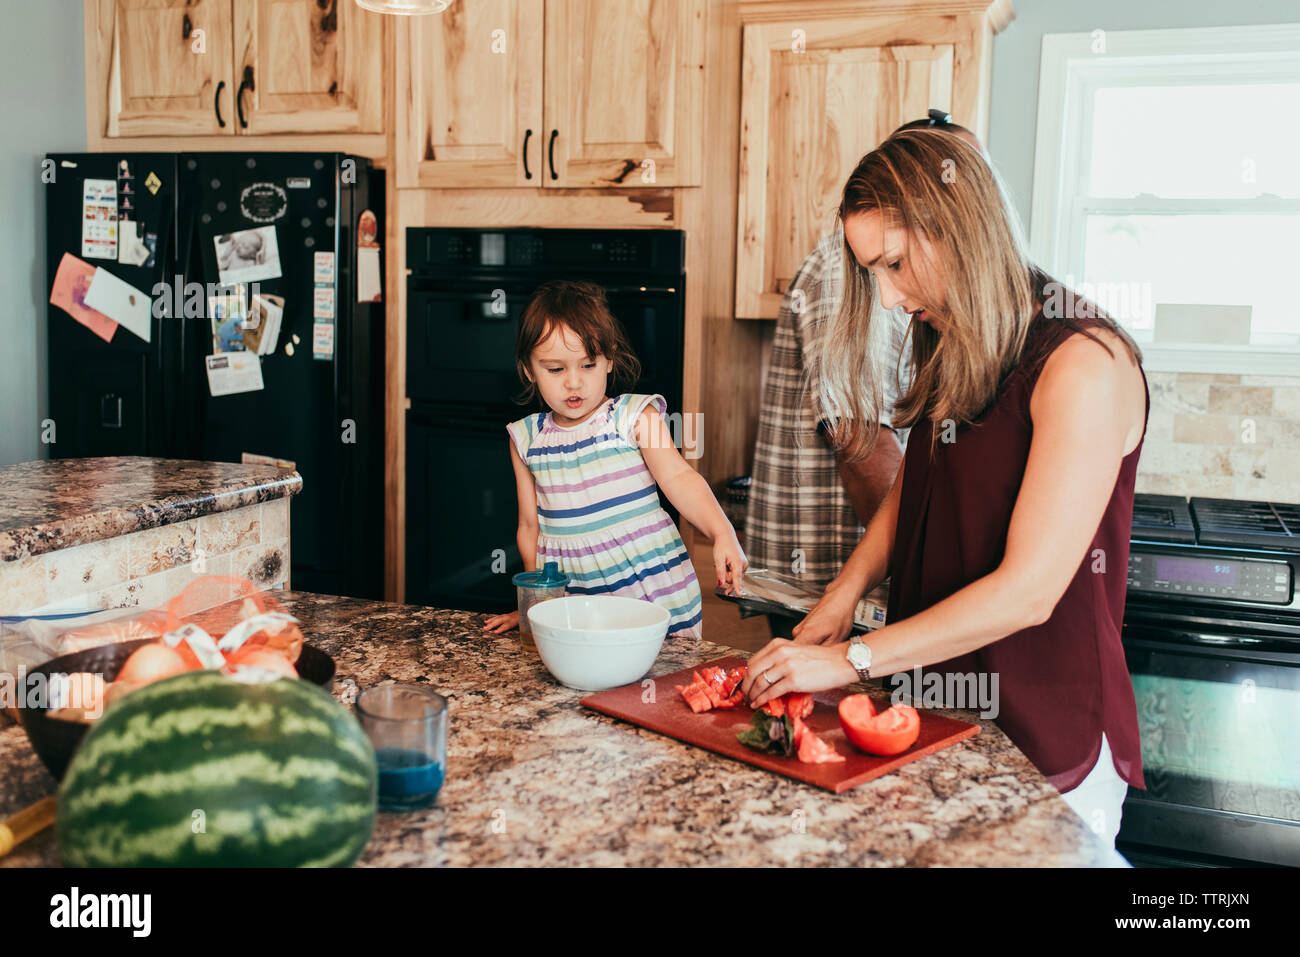 Daughter standing by parents preparing food in kitchen at home Stock Photo